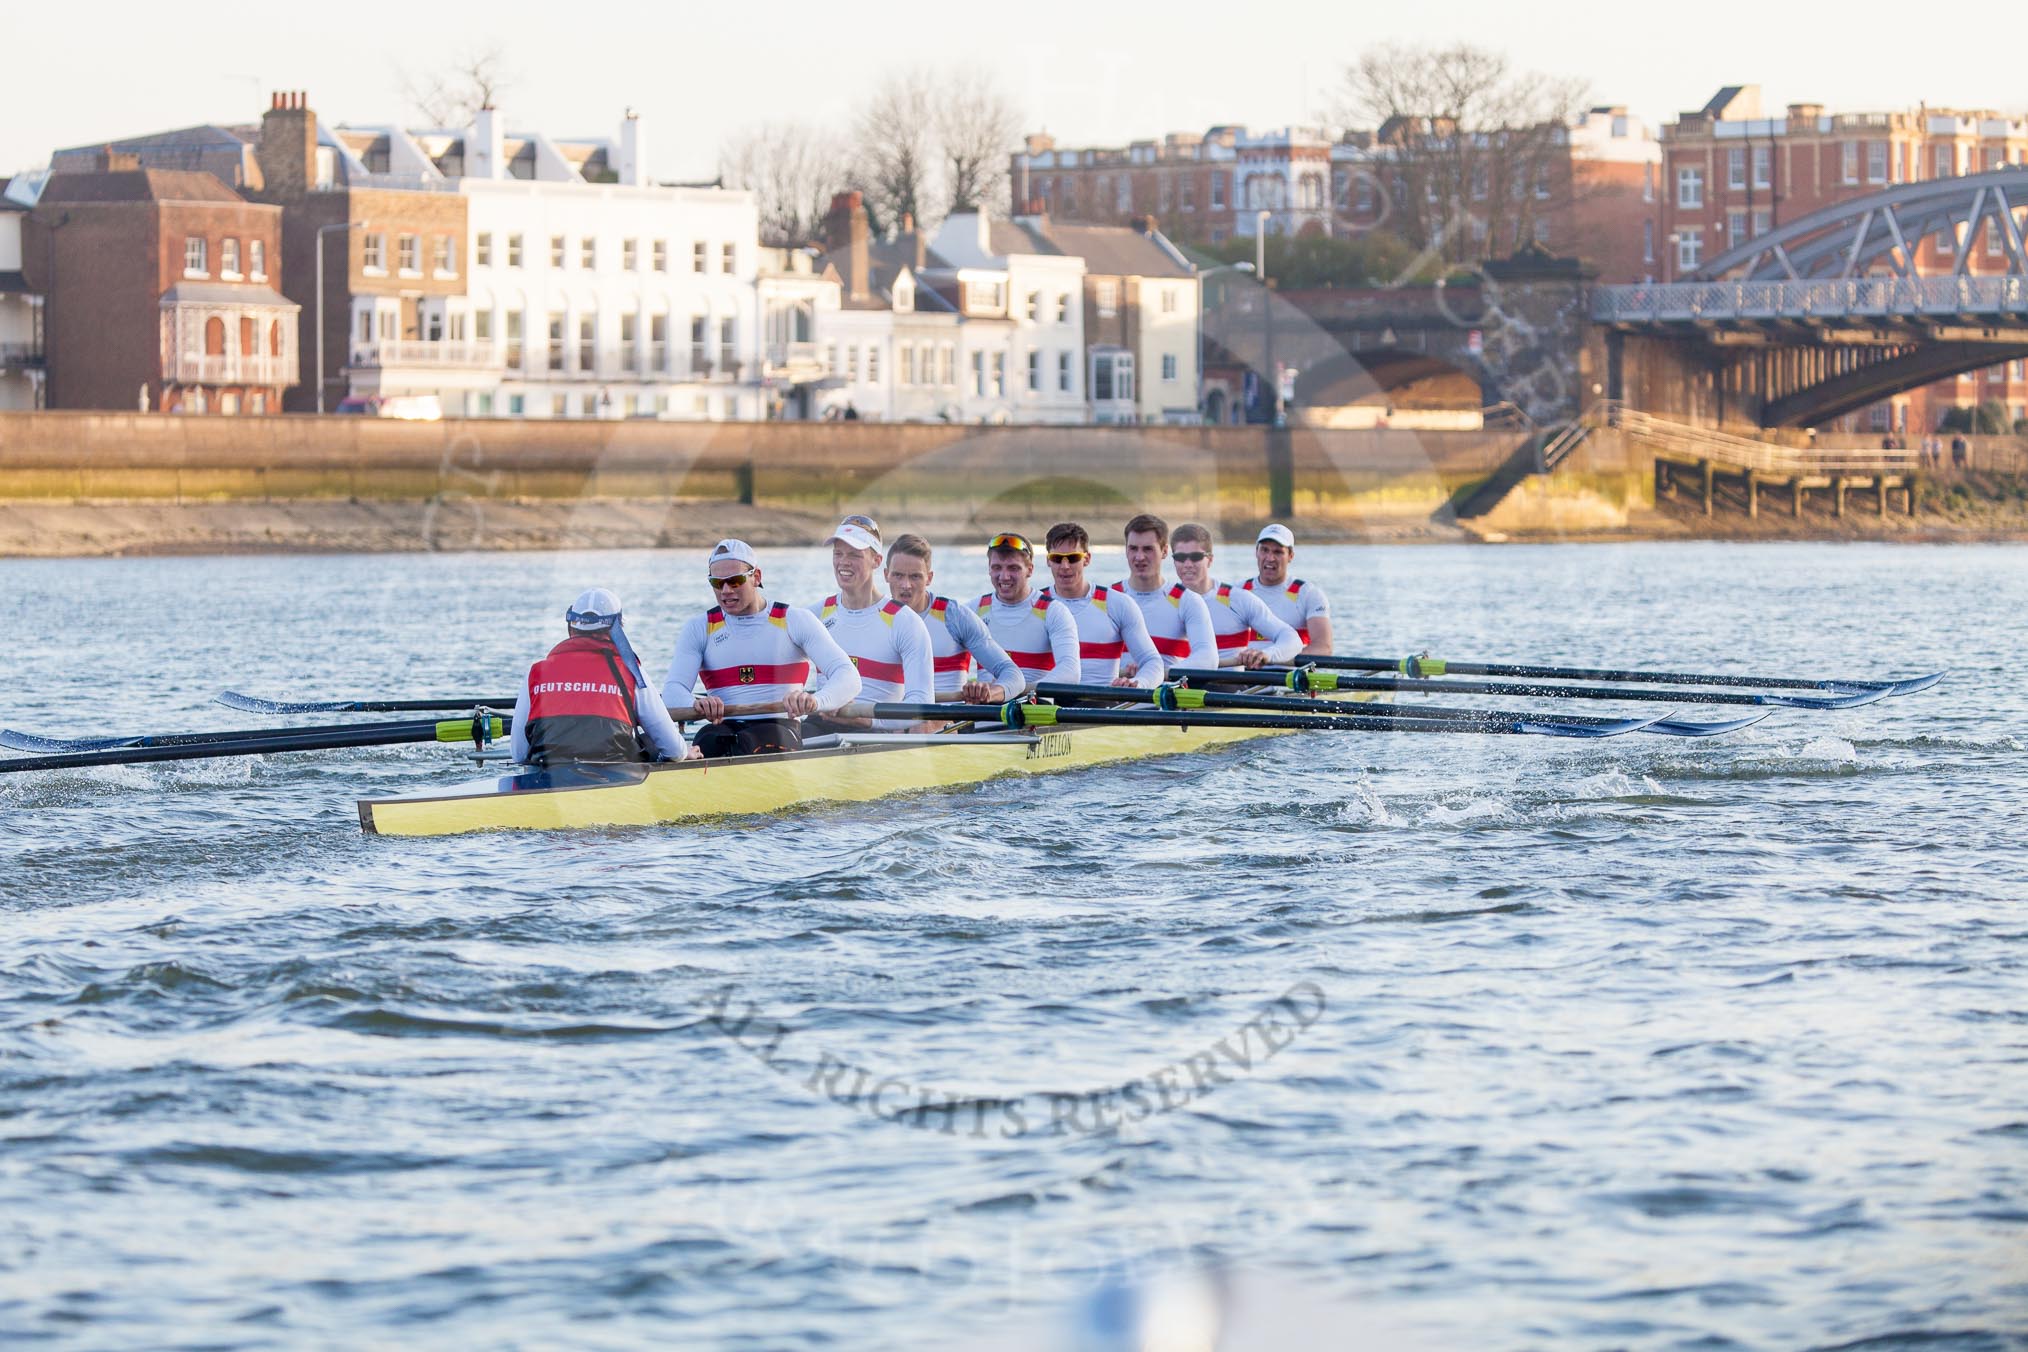 The Boat Race season 2014 - fixture OUBC vs German U23: The OUBC boat during the second race, approaching Barnes Railway Bridge..
River Thames between Putney Bridge and Chiswick Bridge,



on 08 March 2014 at 17:06, image #232